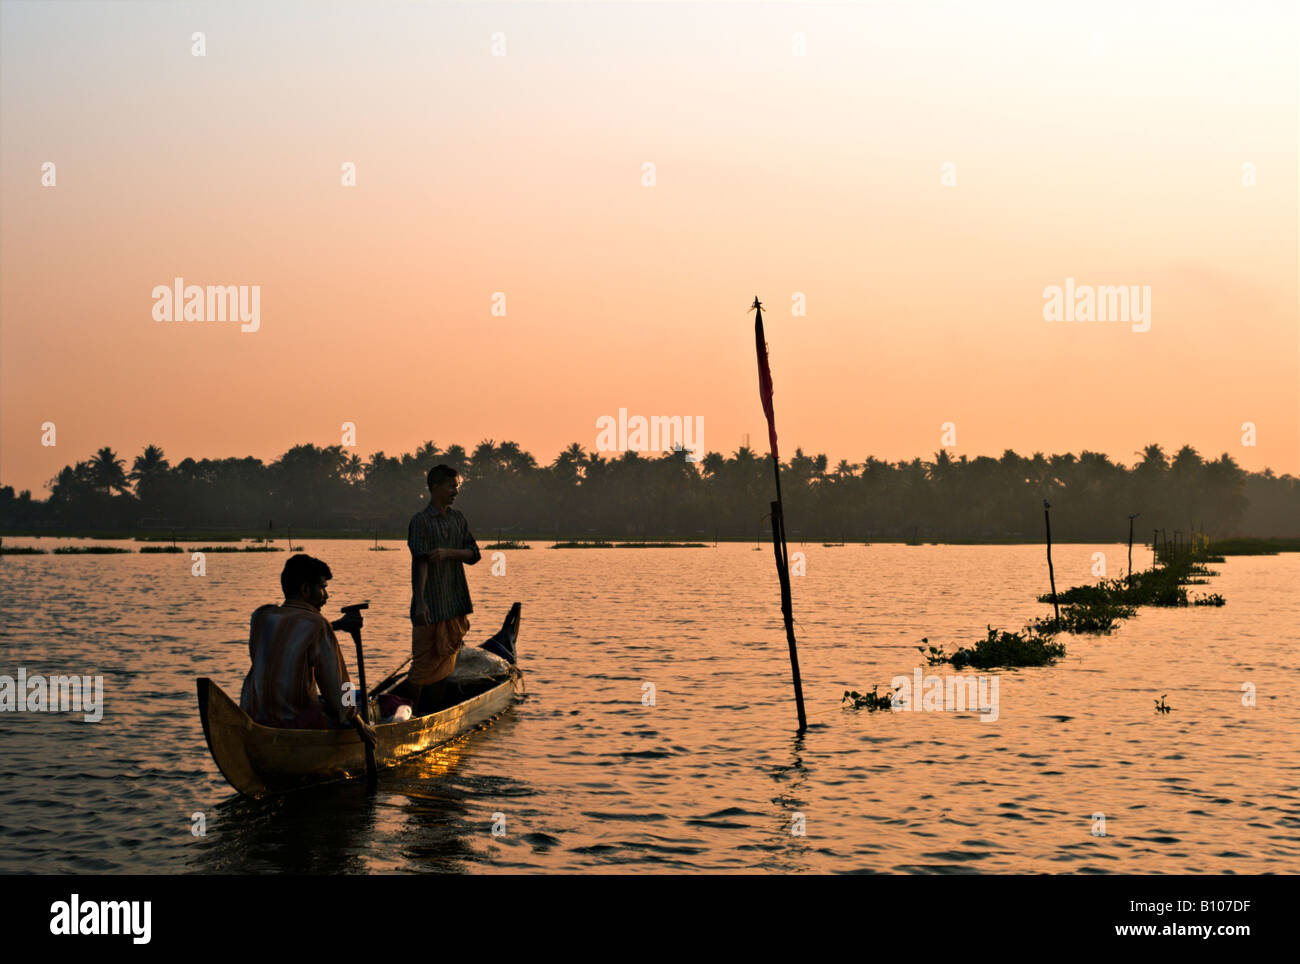 INDIA KERALA Two Indian fishermen rowing their wooden boat in Vembanad Lake at sunset as they set out to spend the night fishing Stock Photo